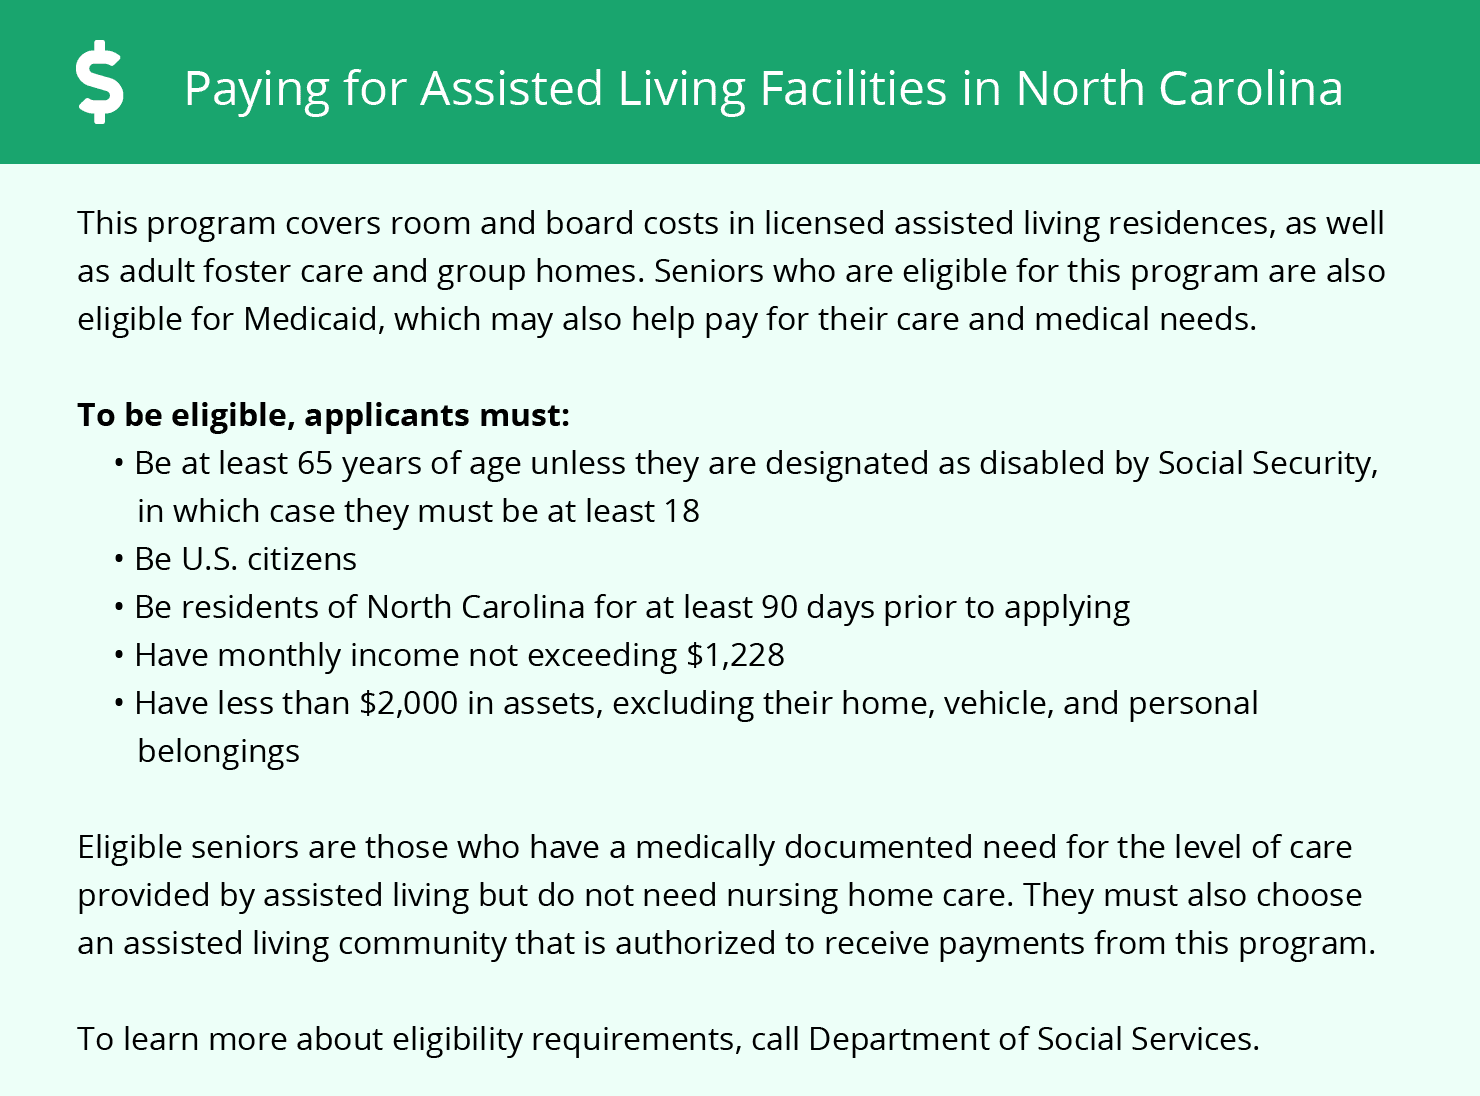 Paying for Assisted Living Facilities in North Carolina